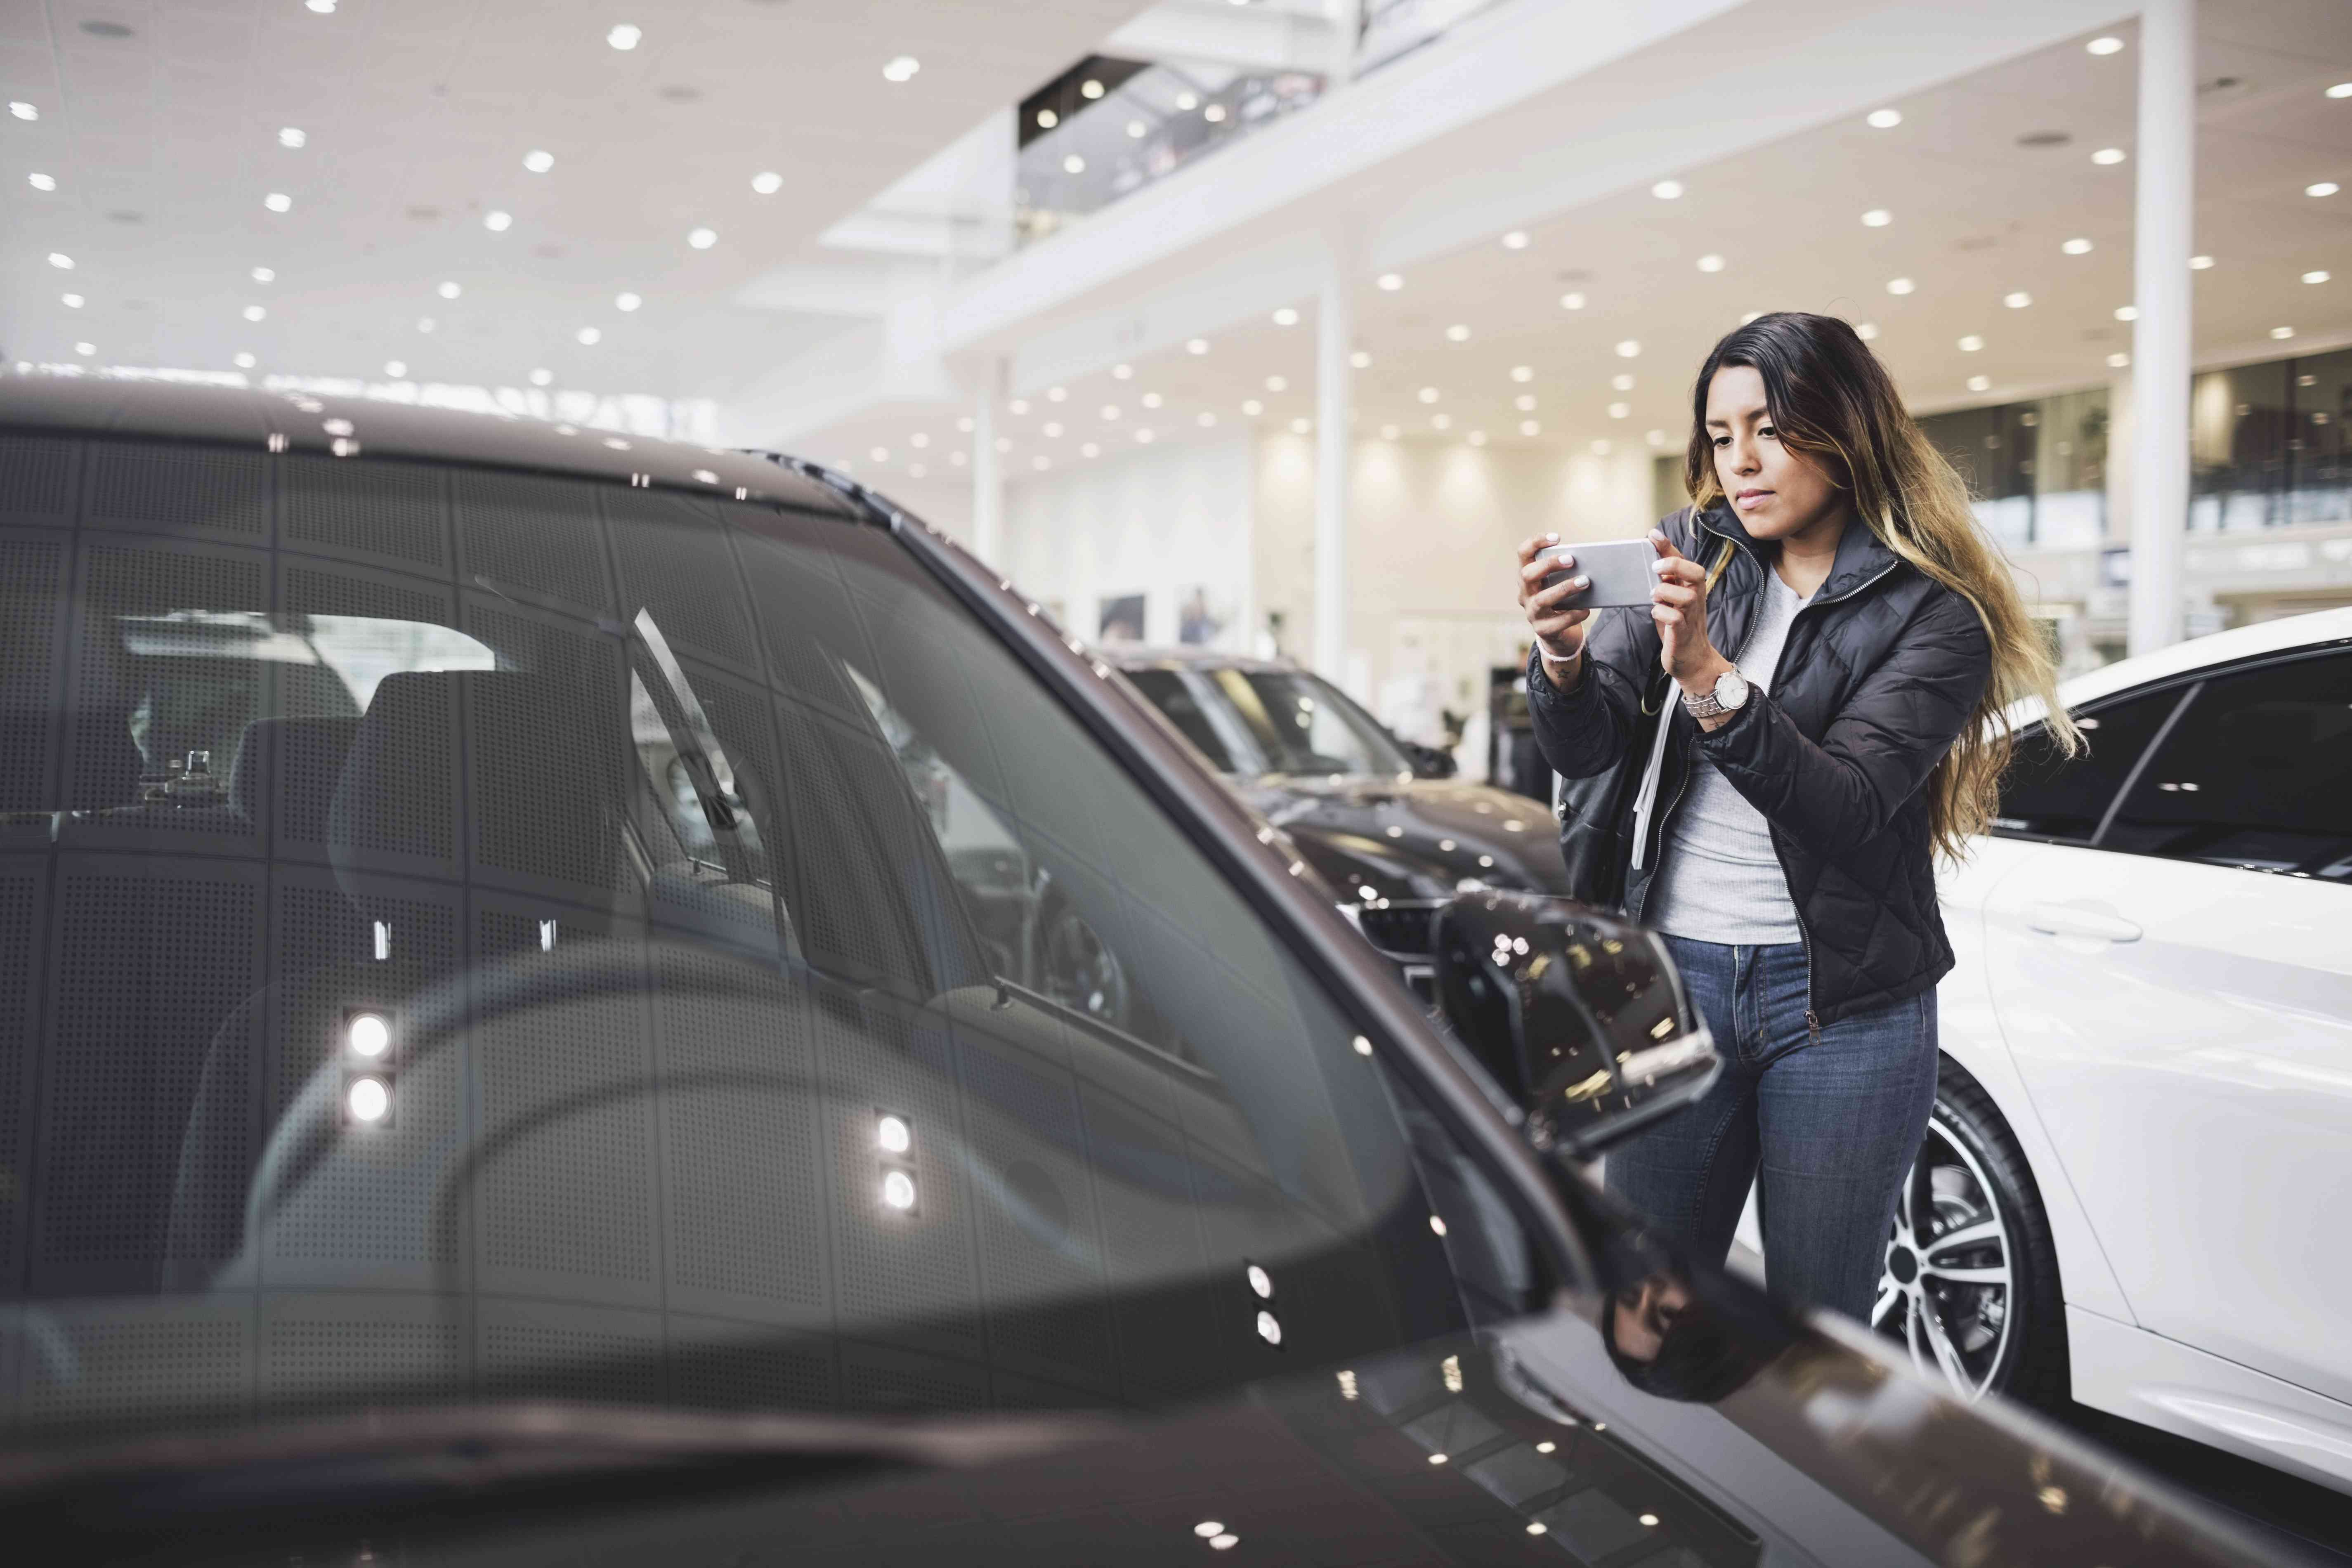 A woman looks at cars in a showroom.